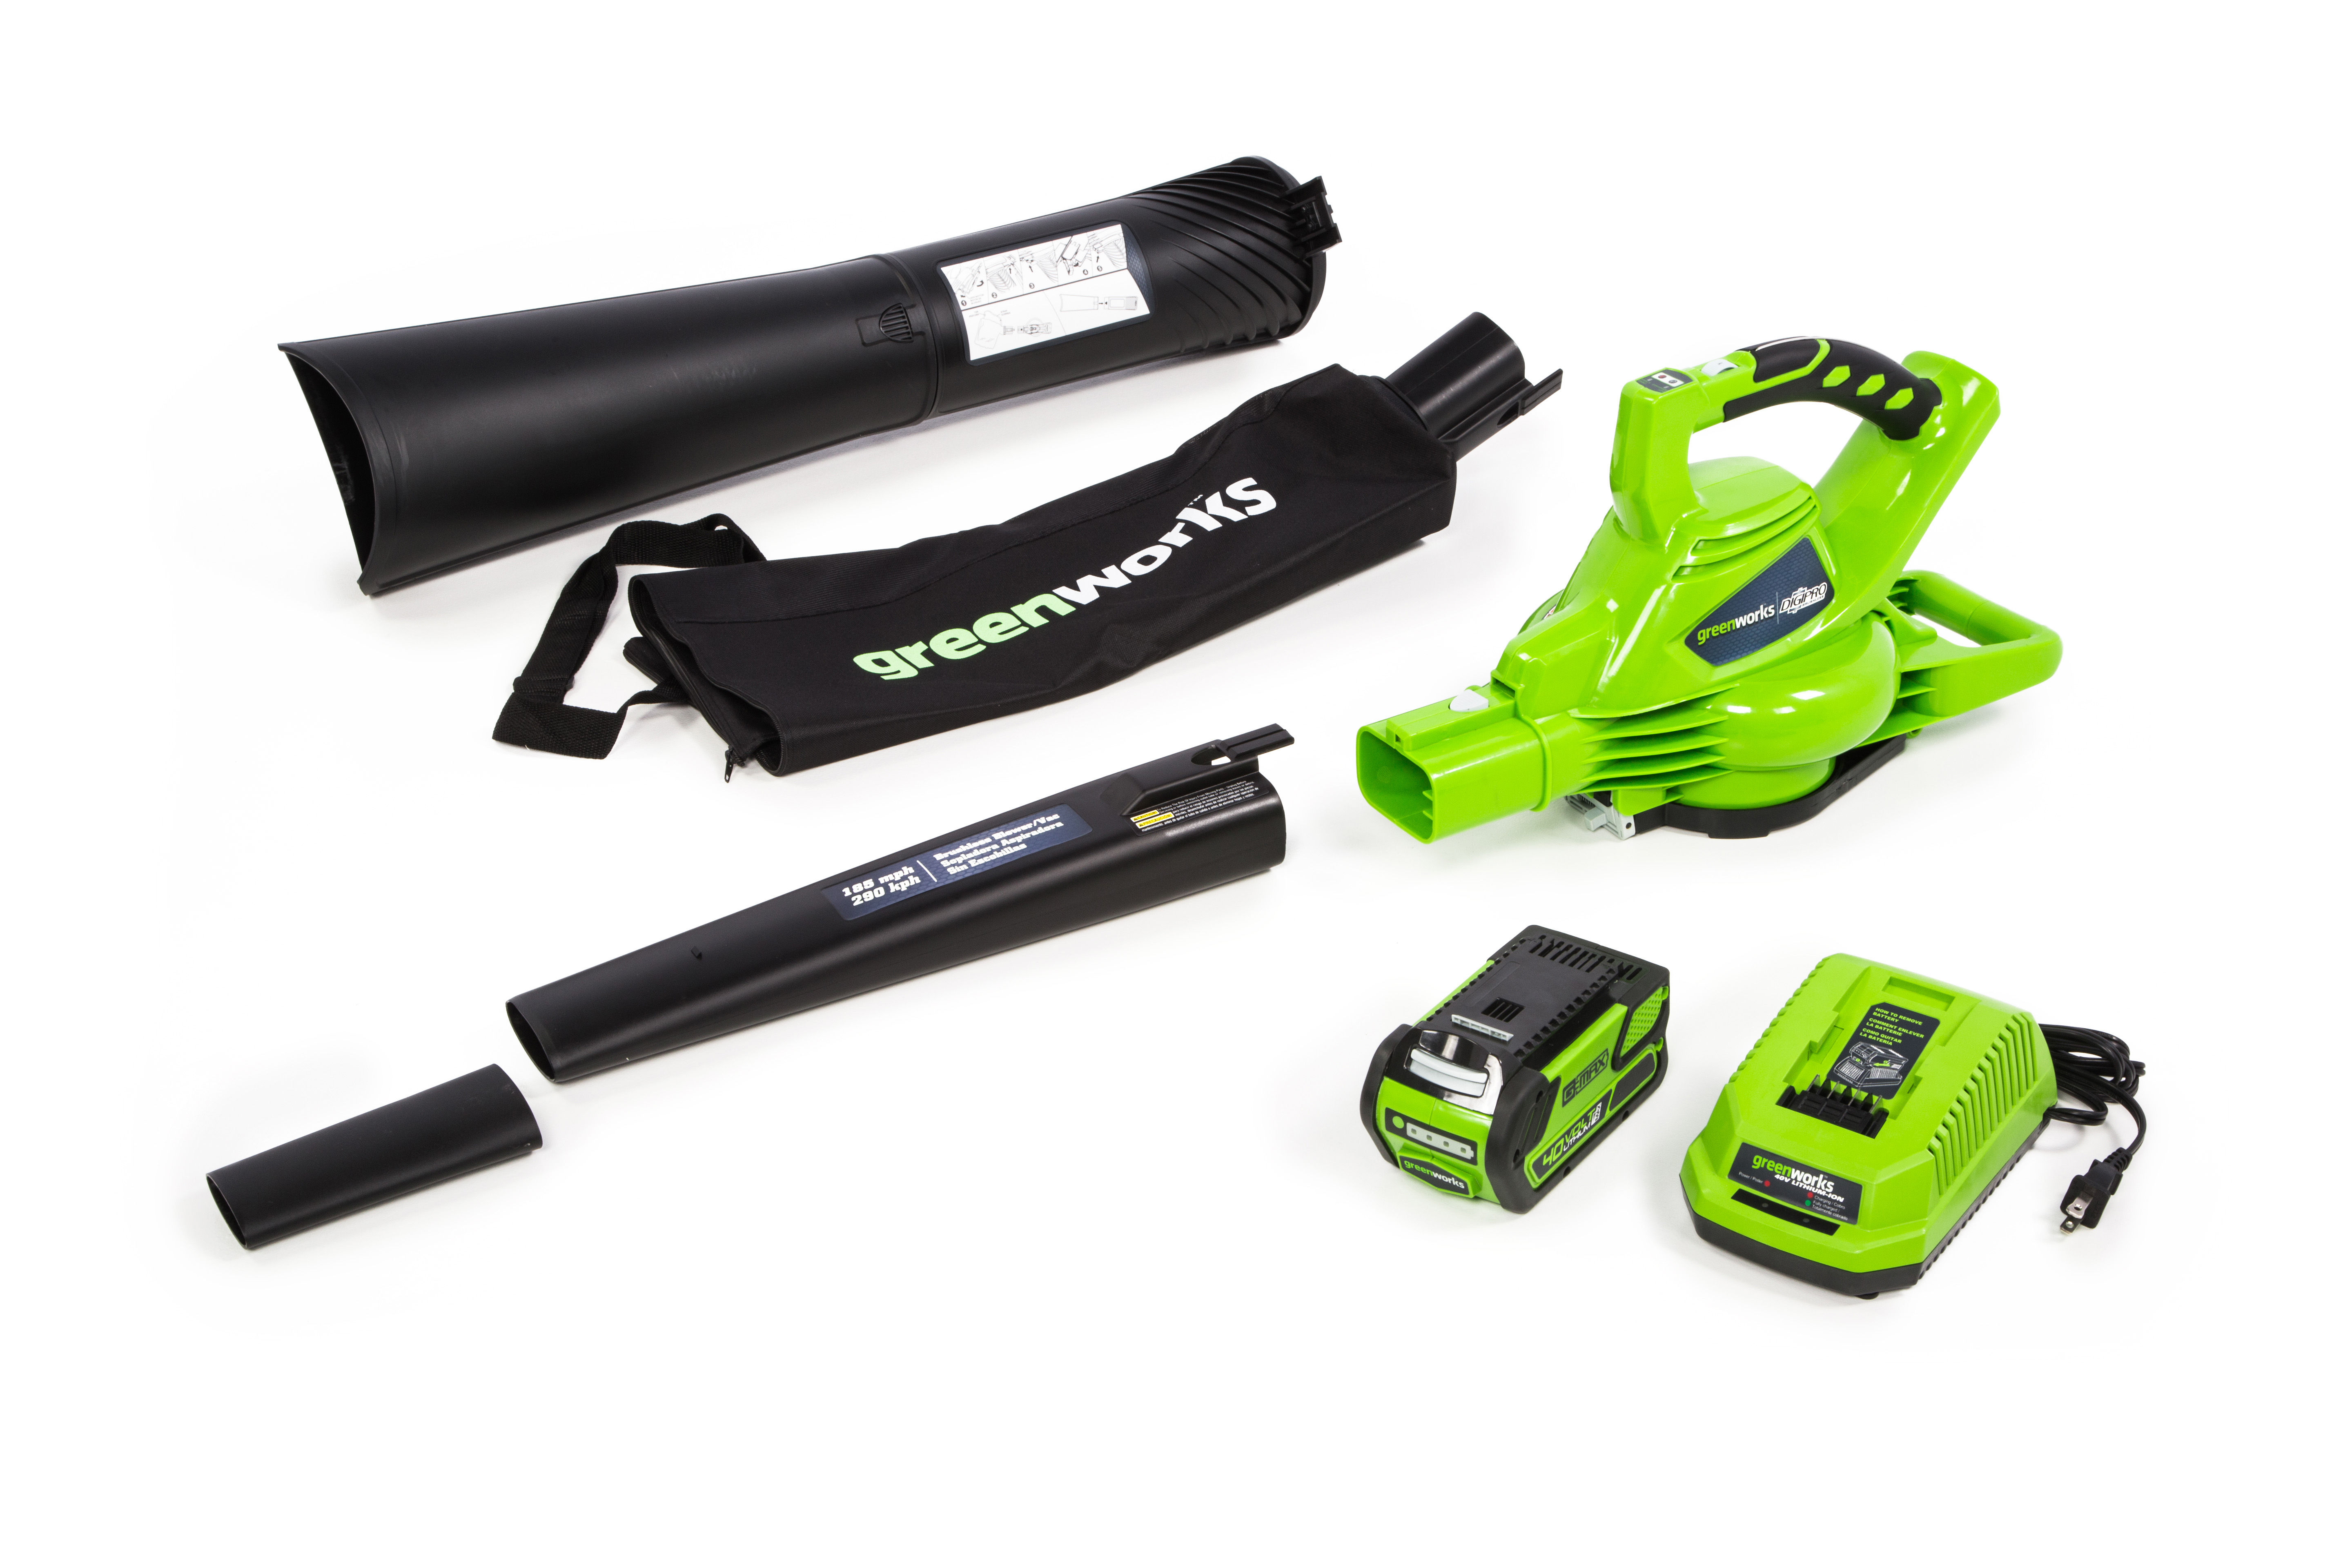 Greenworks 40V 340 CFM Leaf Blower/Vacuum with 4.0 Ah Battery and Charger, 24322 - image 4 of 7